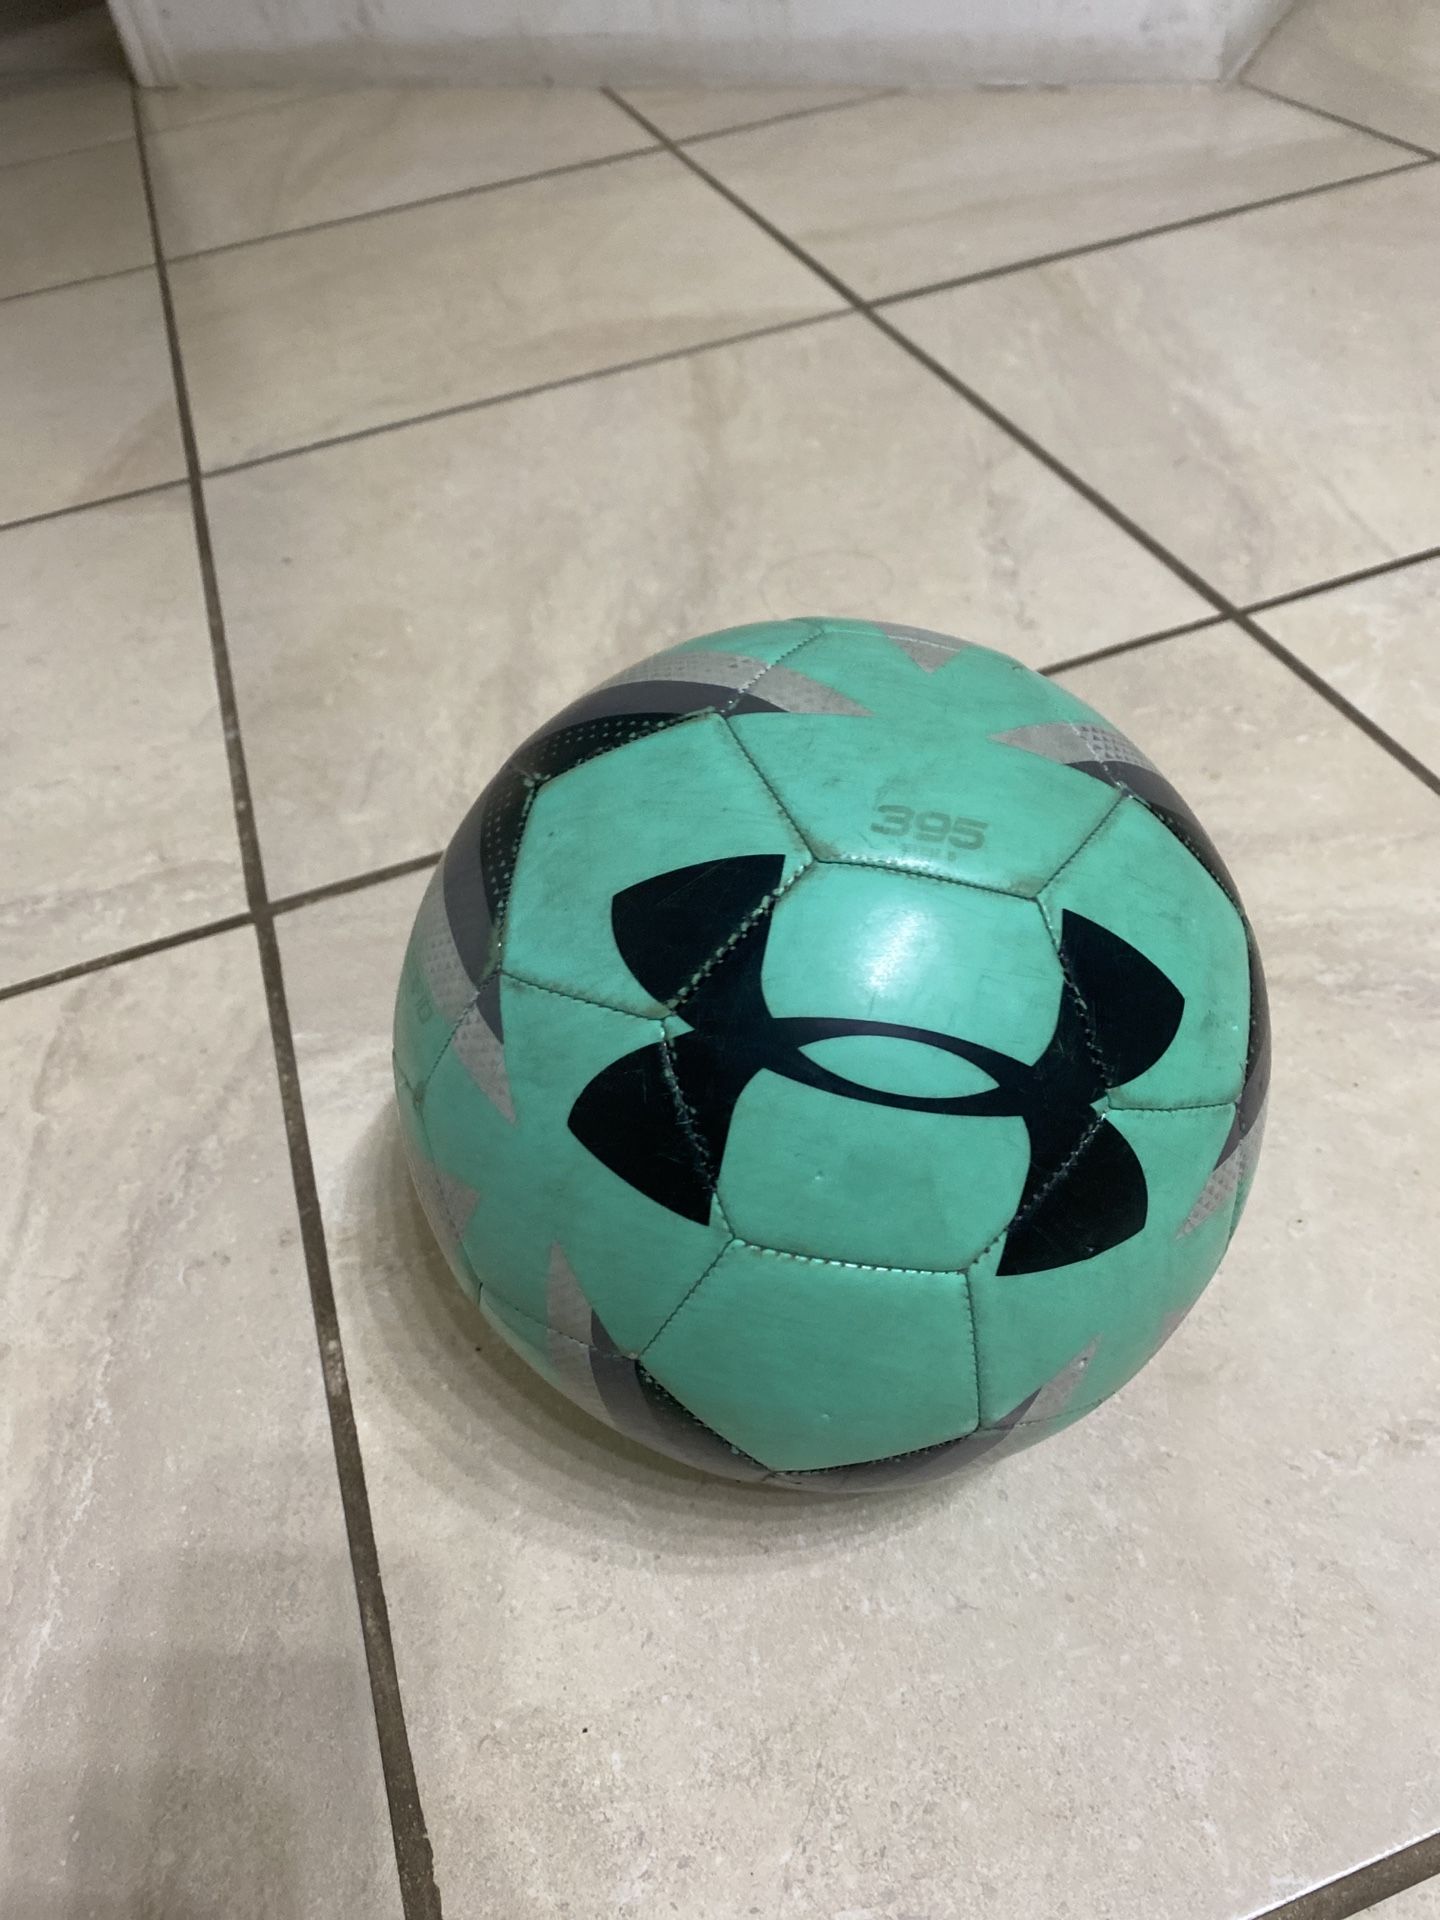 Under Armour 395 Soccer Ball Size 5